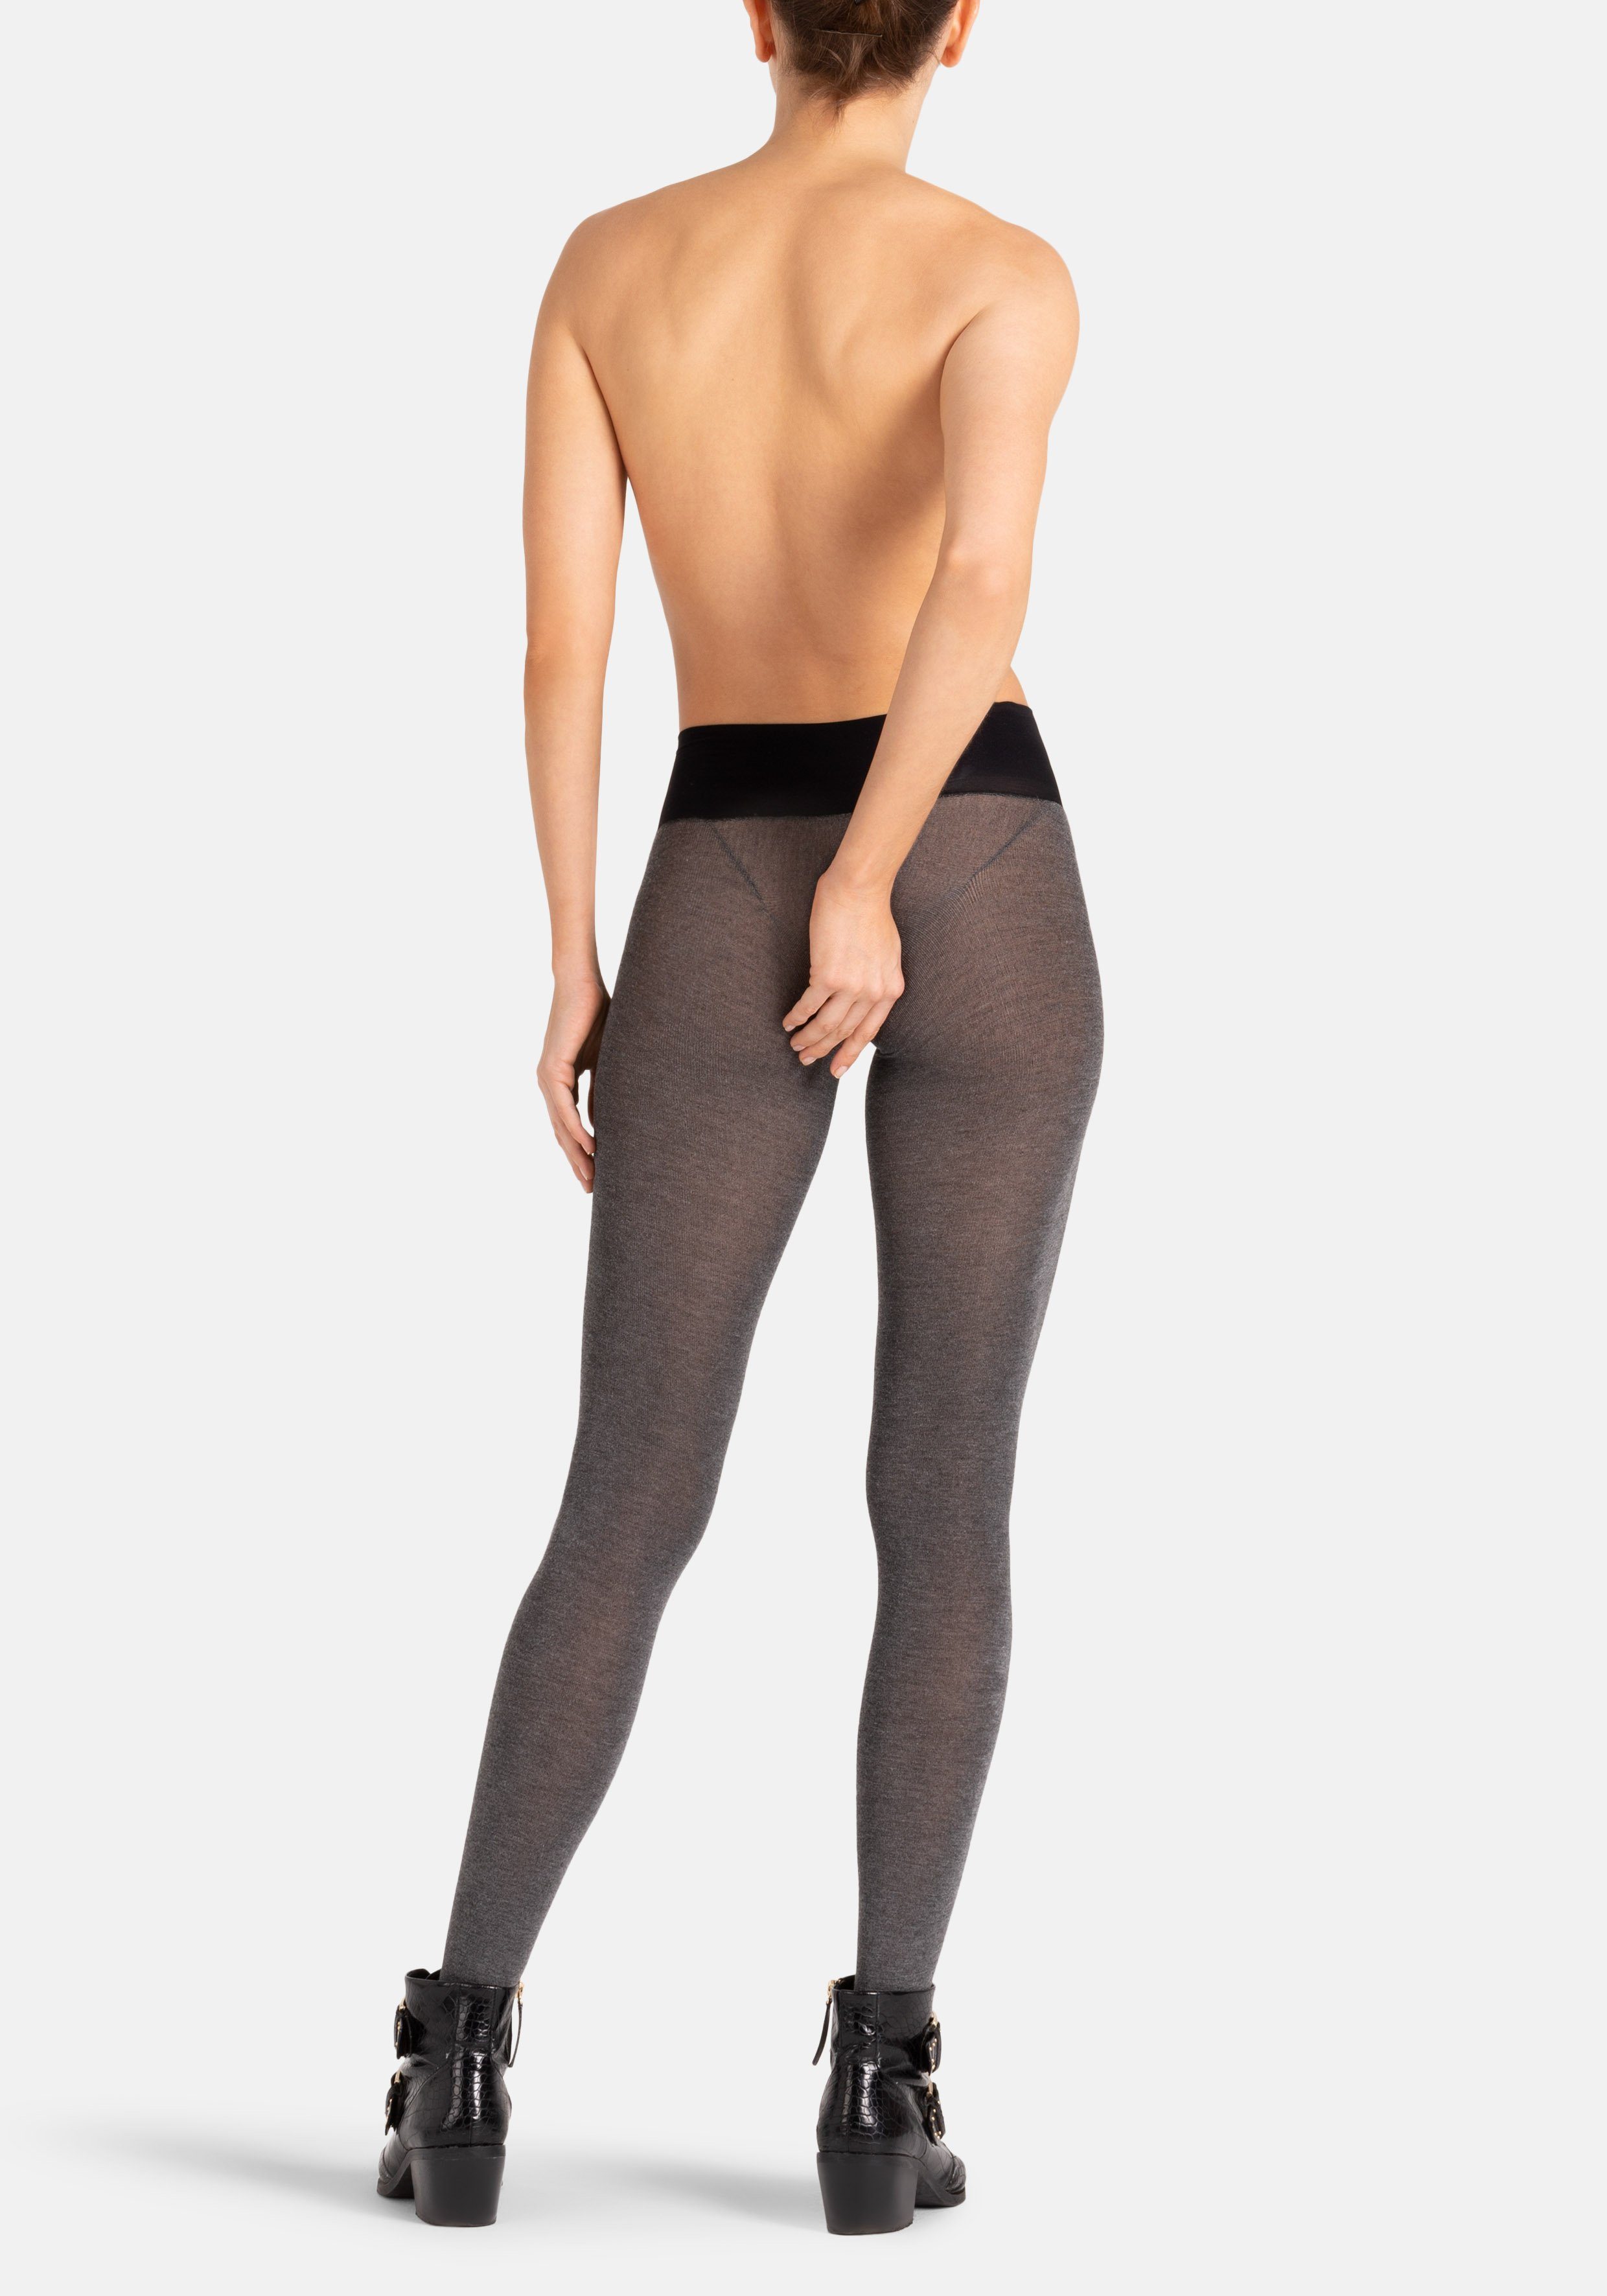 To St) Hot 1er Supersoft (1 Pack Paola grau Too Hide Strumpfhose